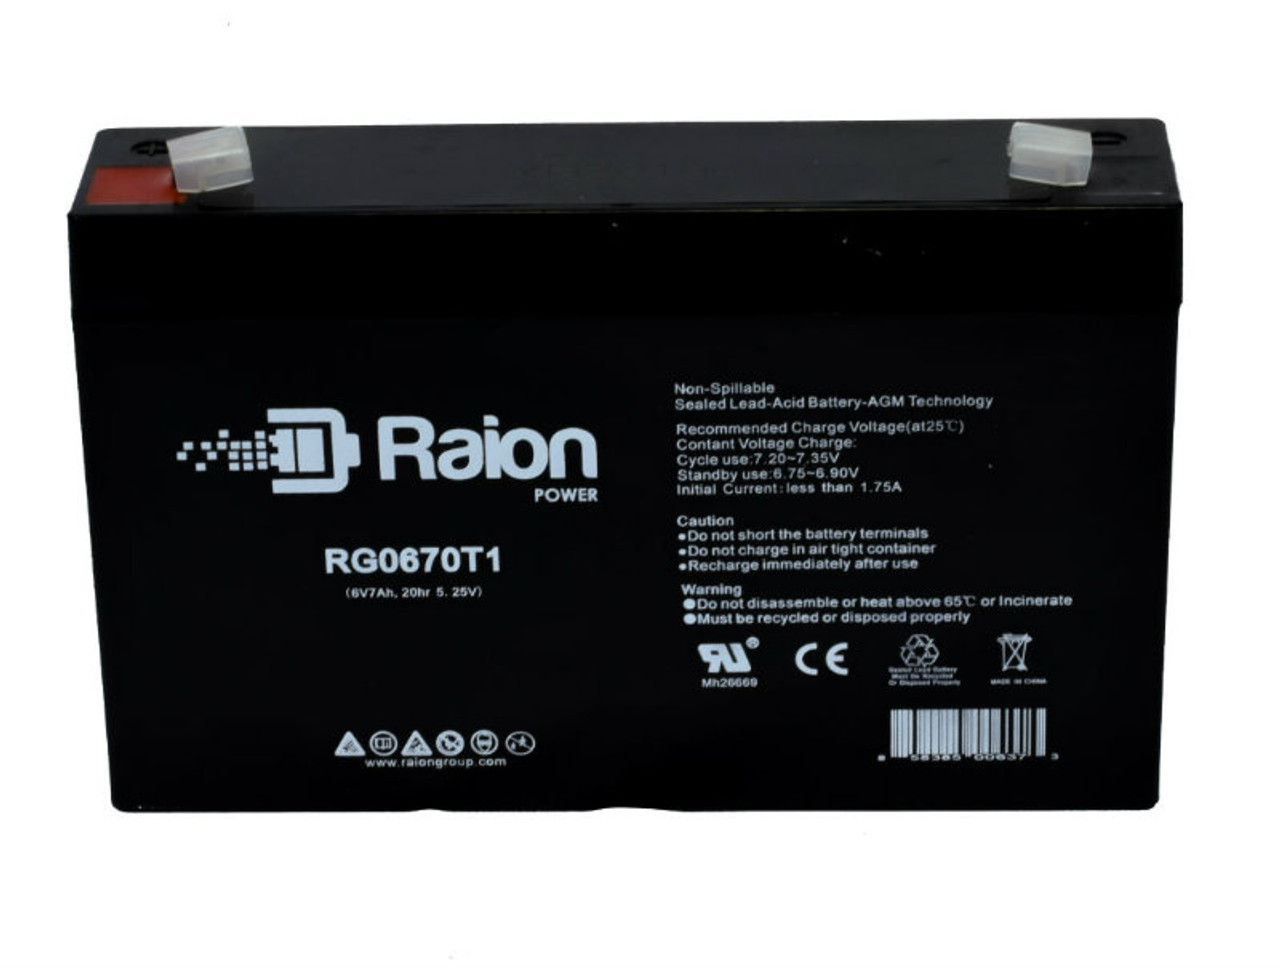 Raion Power RG0670T1 Replacement Battery Cartridge for Fisher-Price Power Wheels C3493 Ford F-150